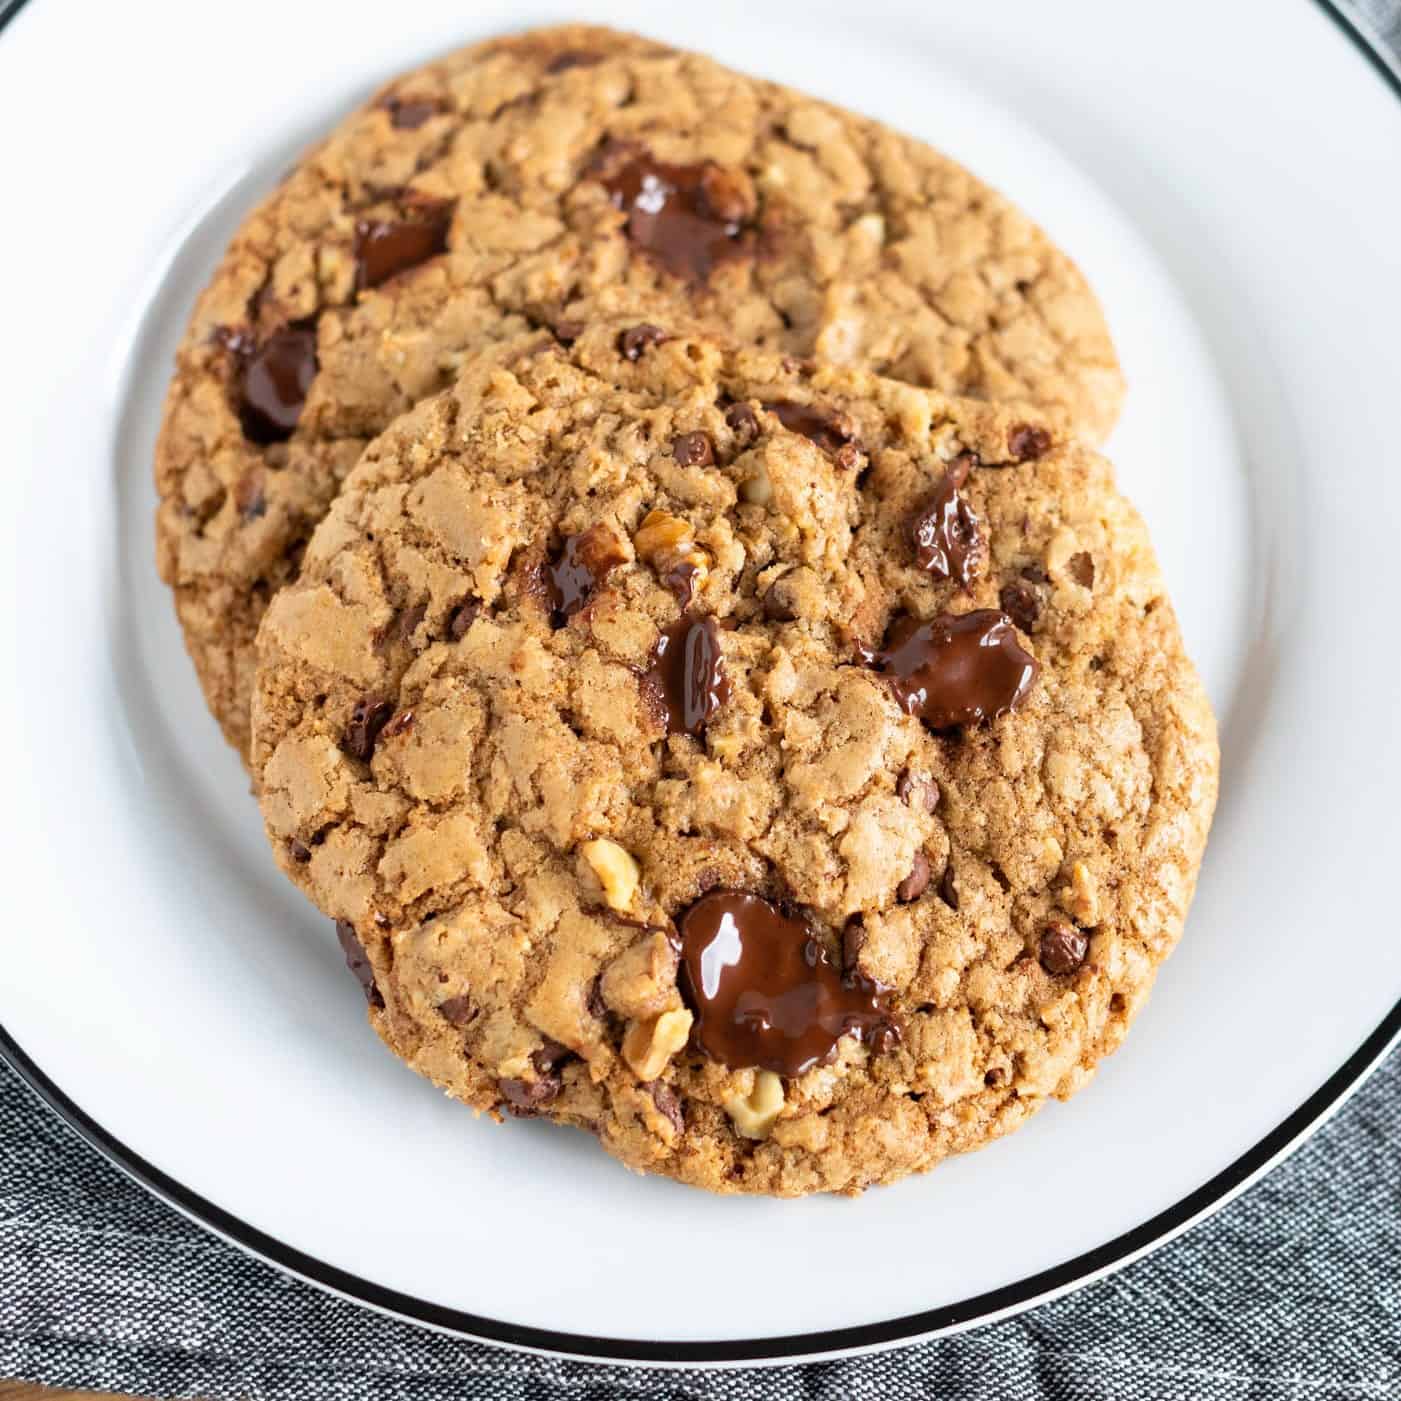 up close picture of DoubleTree's Signature Chocolate Chip Cookies on white dish with black rim on denim napkin #cookie #chocolatechipcookie #doubletreesignaturecookie #baking